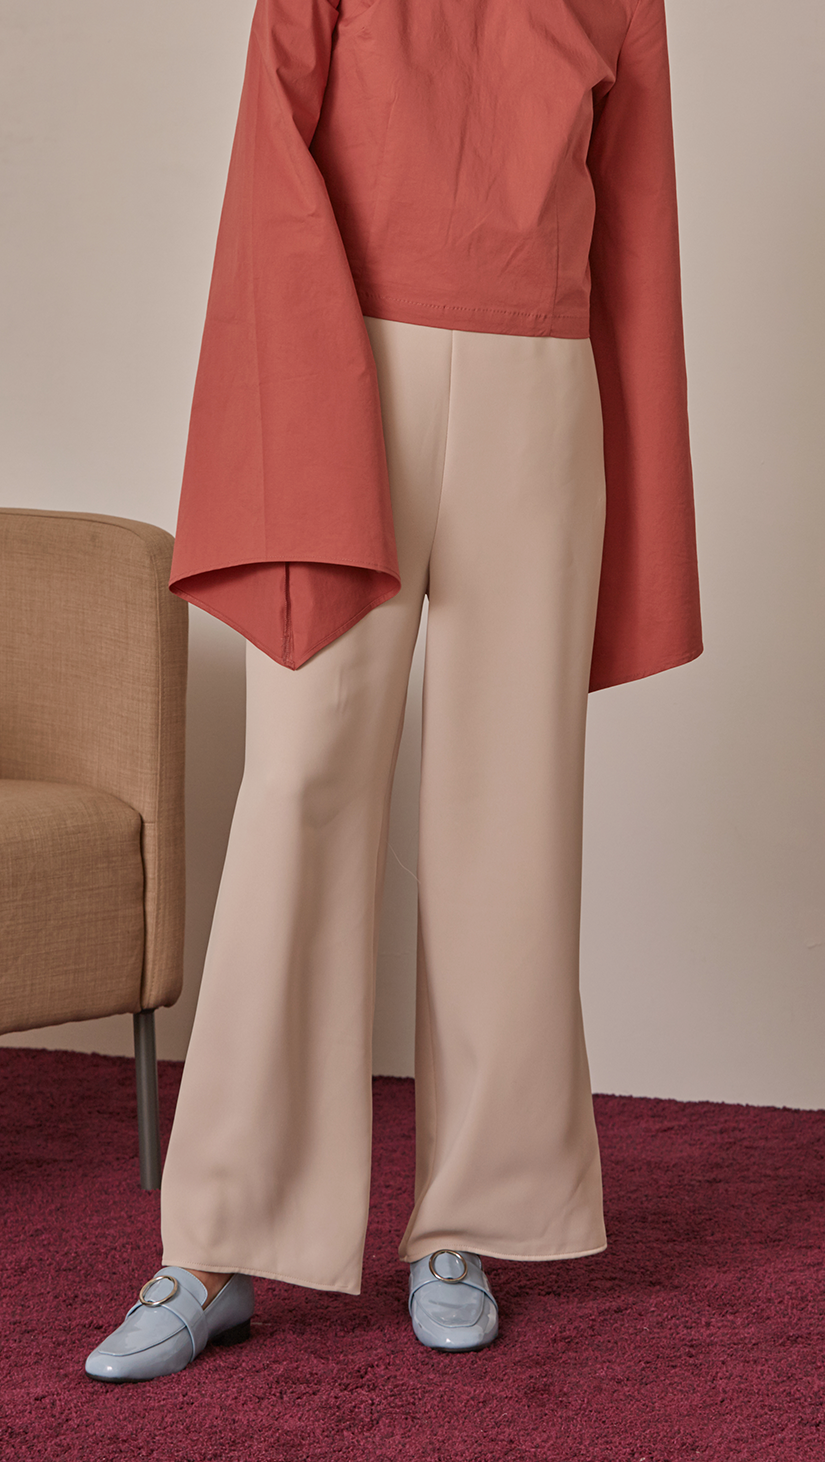 Exaggerated feminine gathered long sleeves. Bell sleeves cuffs. Concealed zip opening at back.